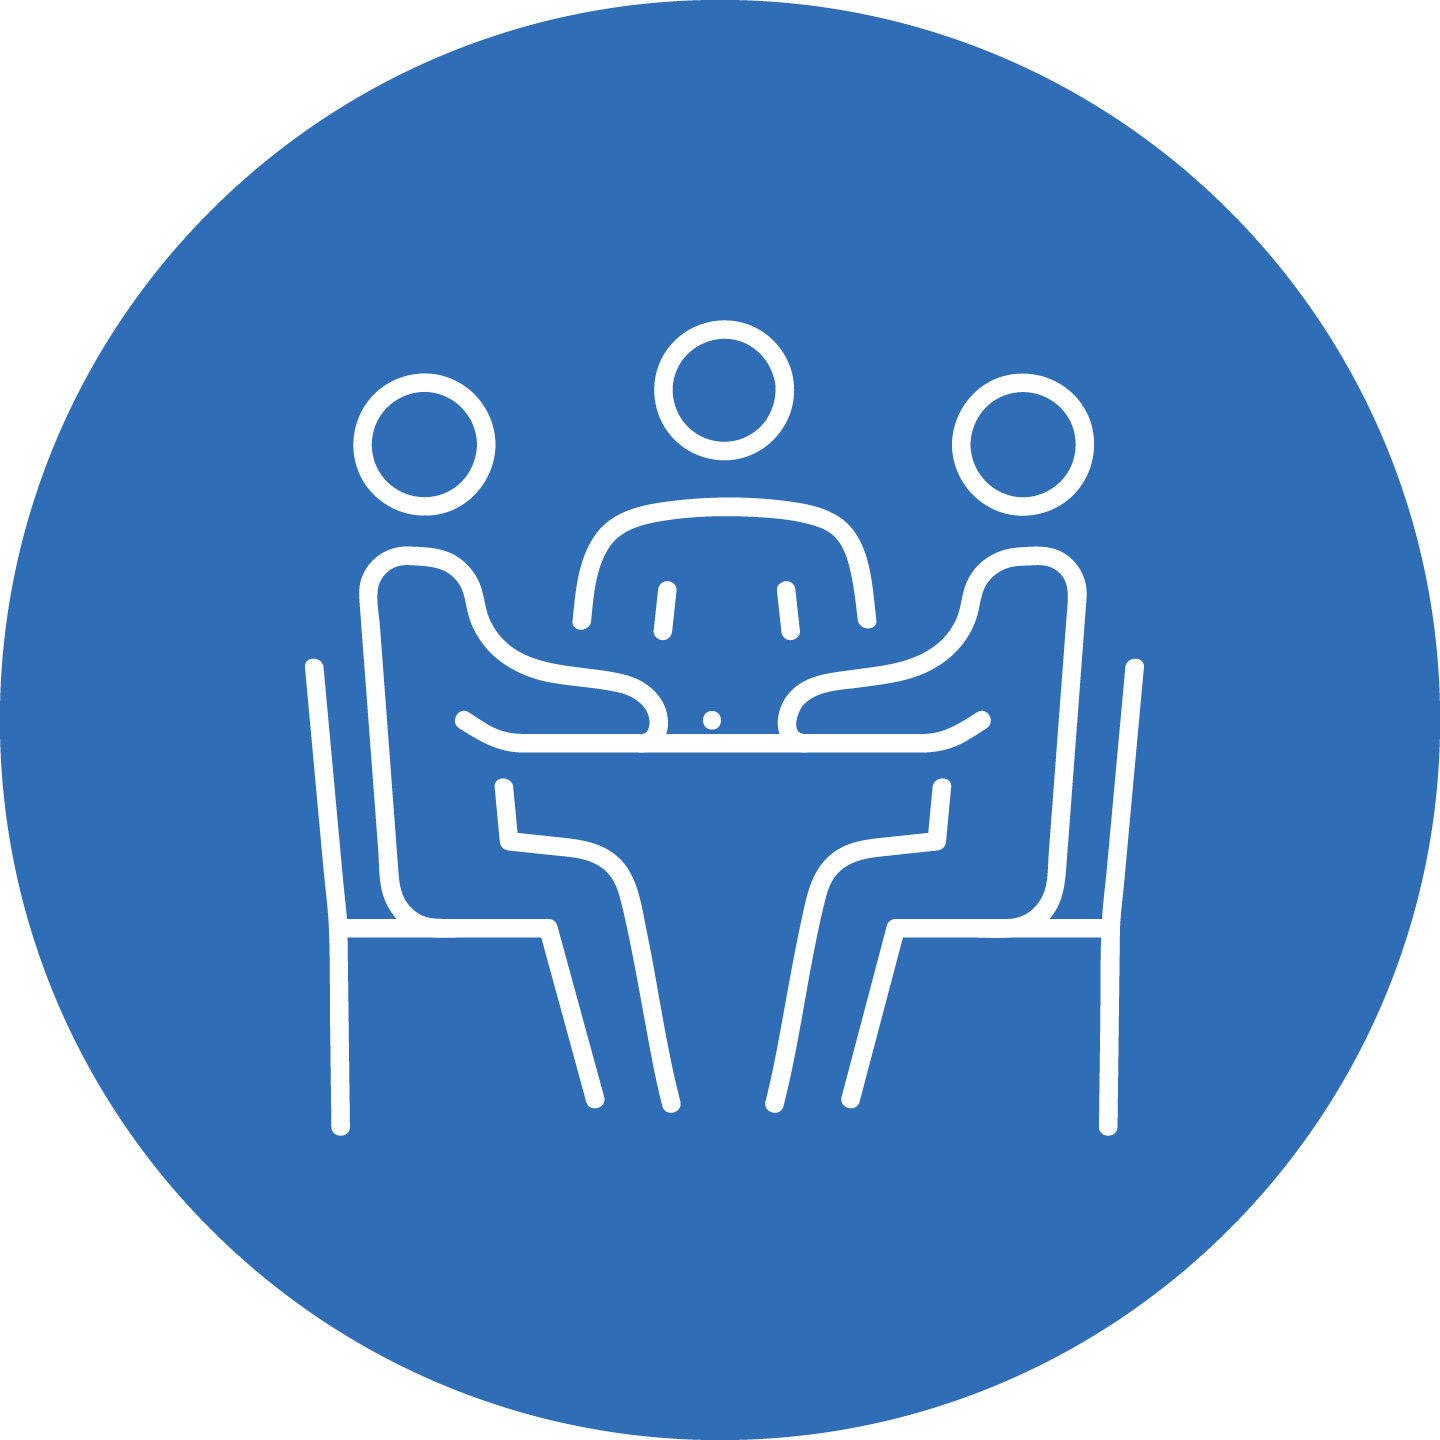 illustration of 3 person sitting on chairs in a blue filled circle